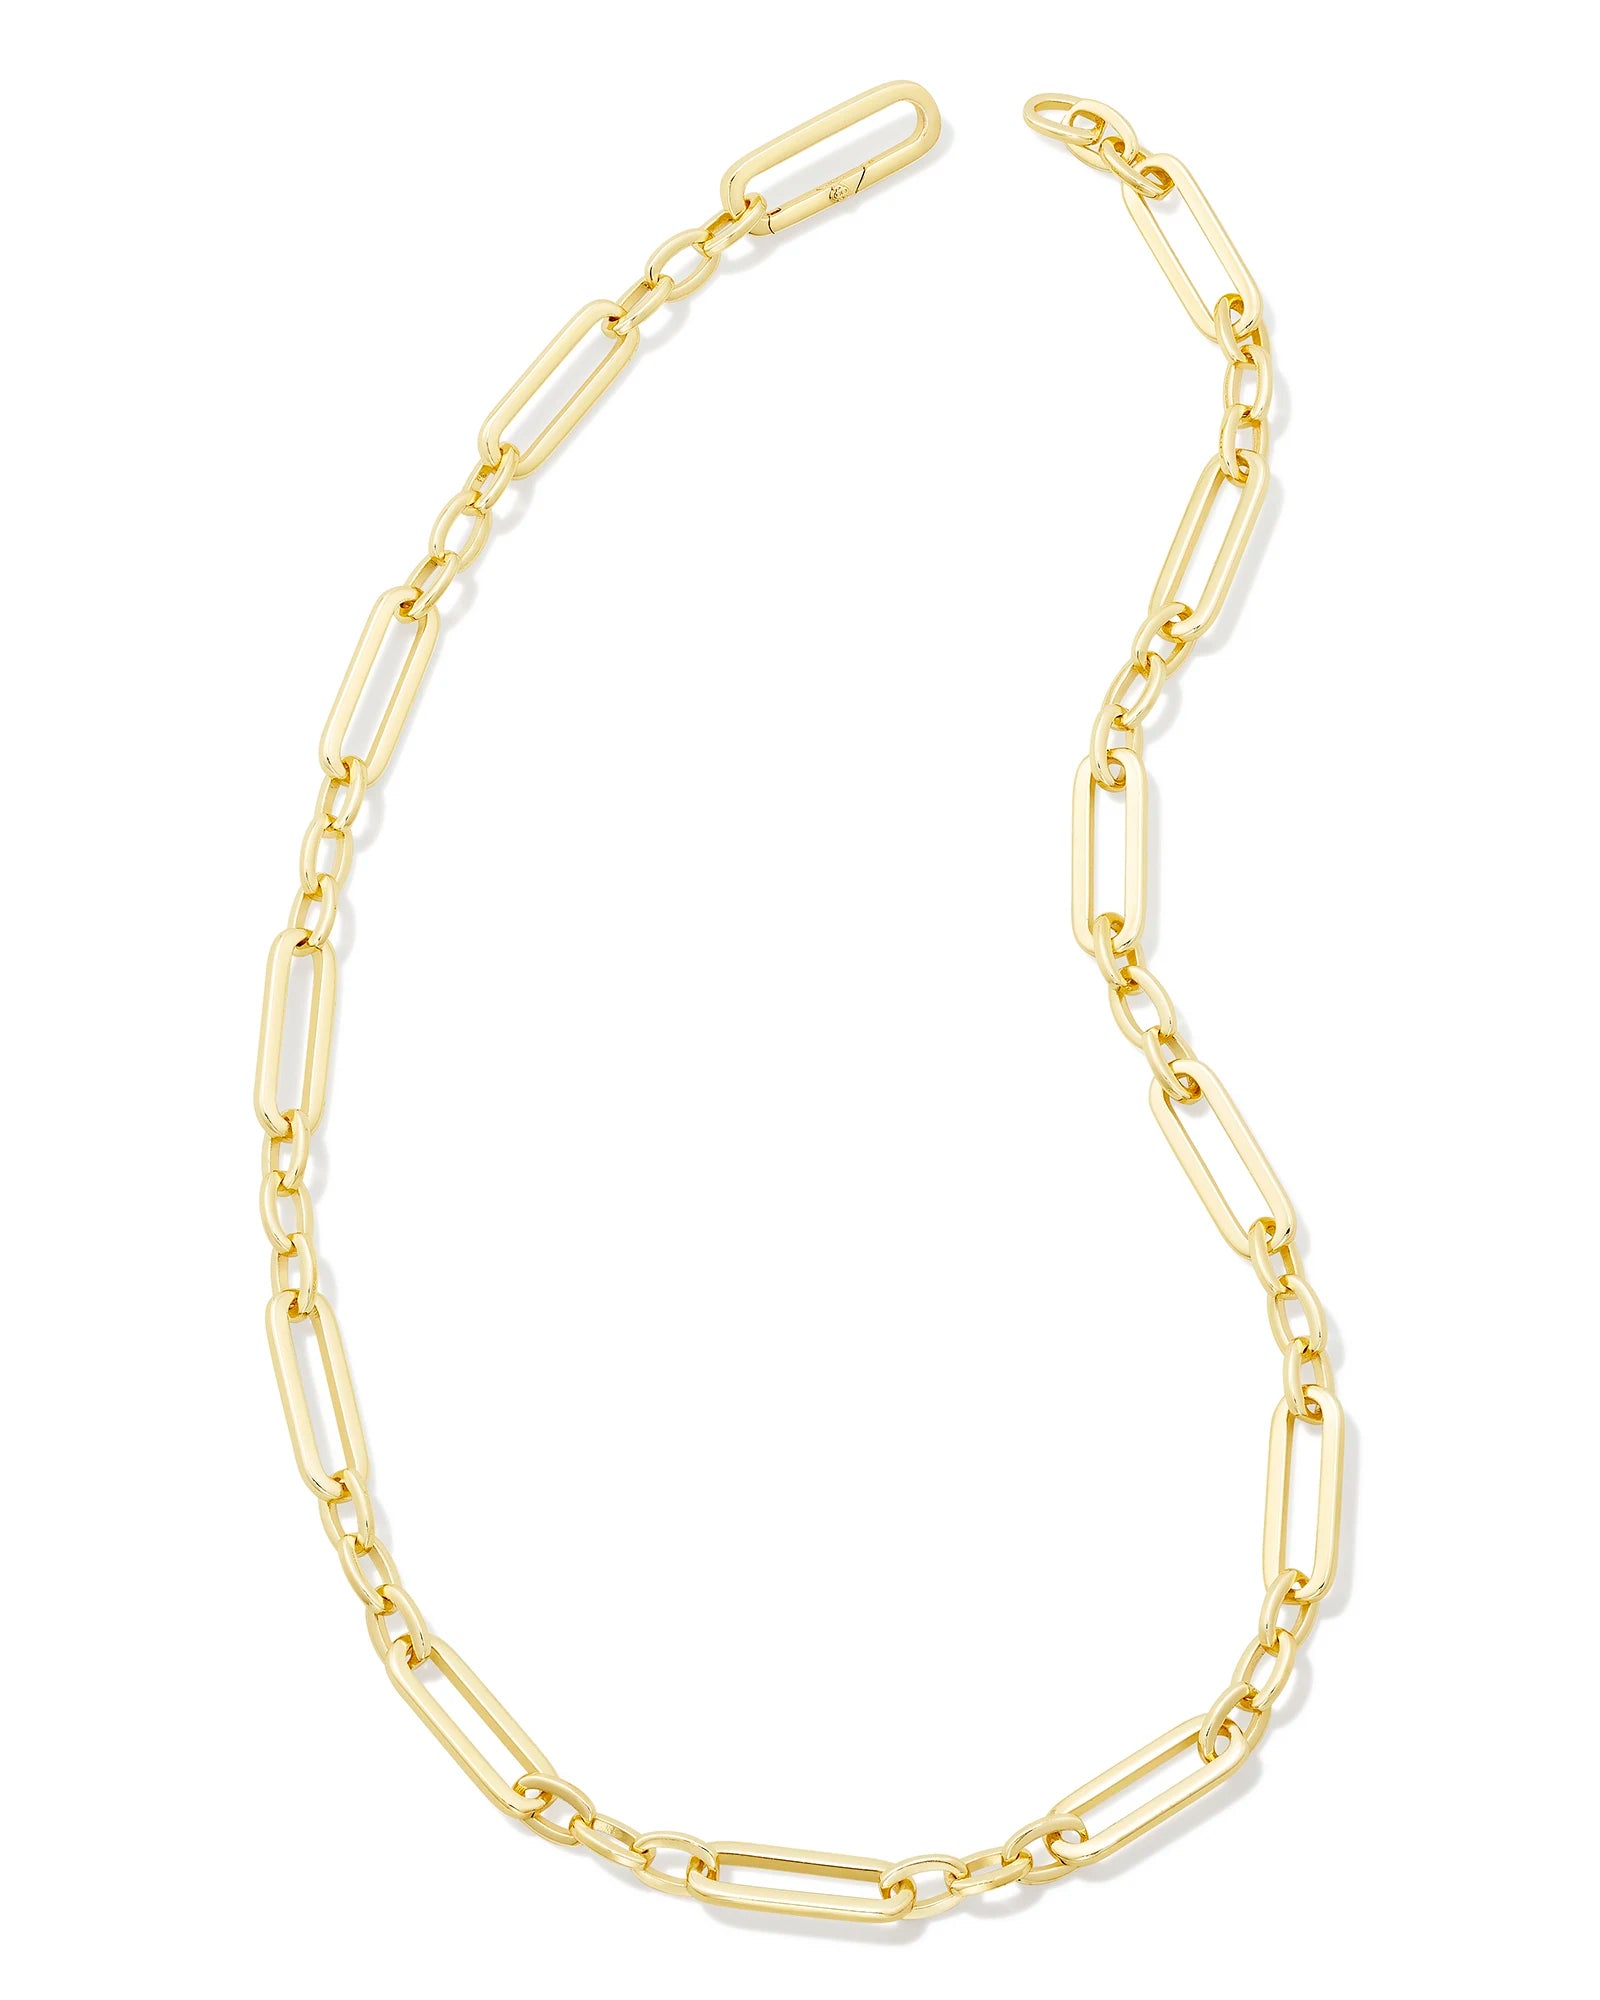 Kendra Scott Heather Link and Chain Necklace Gold-Necklaces-Kendra Scott-N00227GLD-The Twisted Chandelier